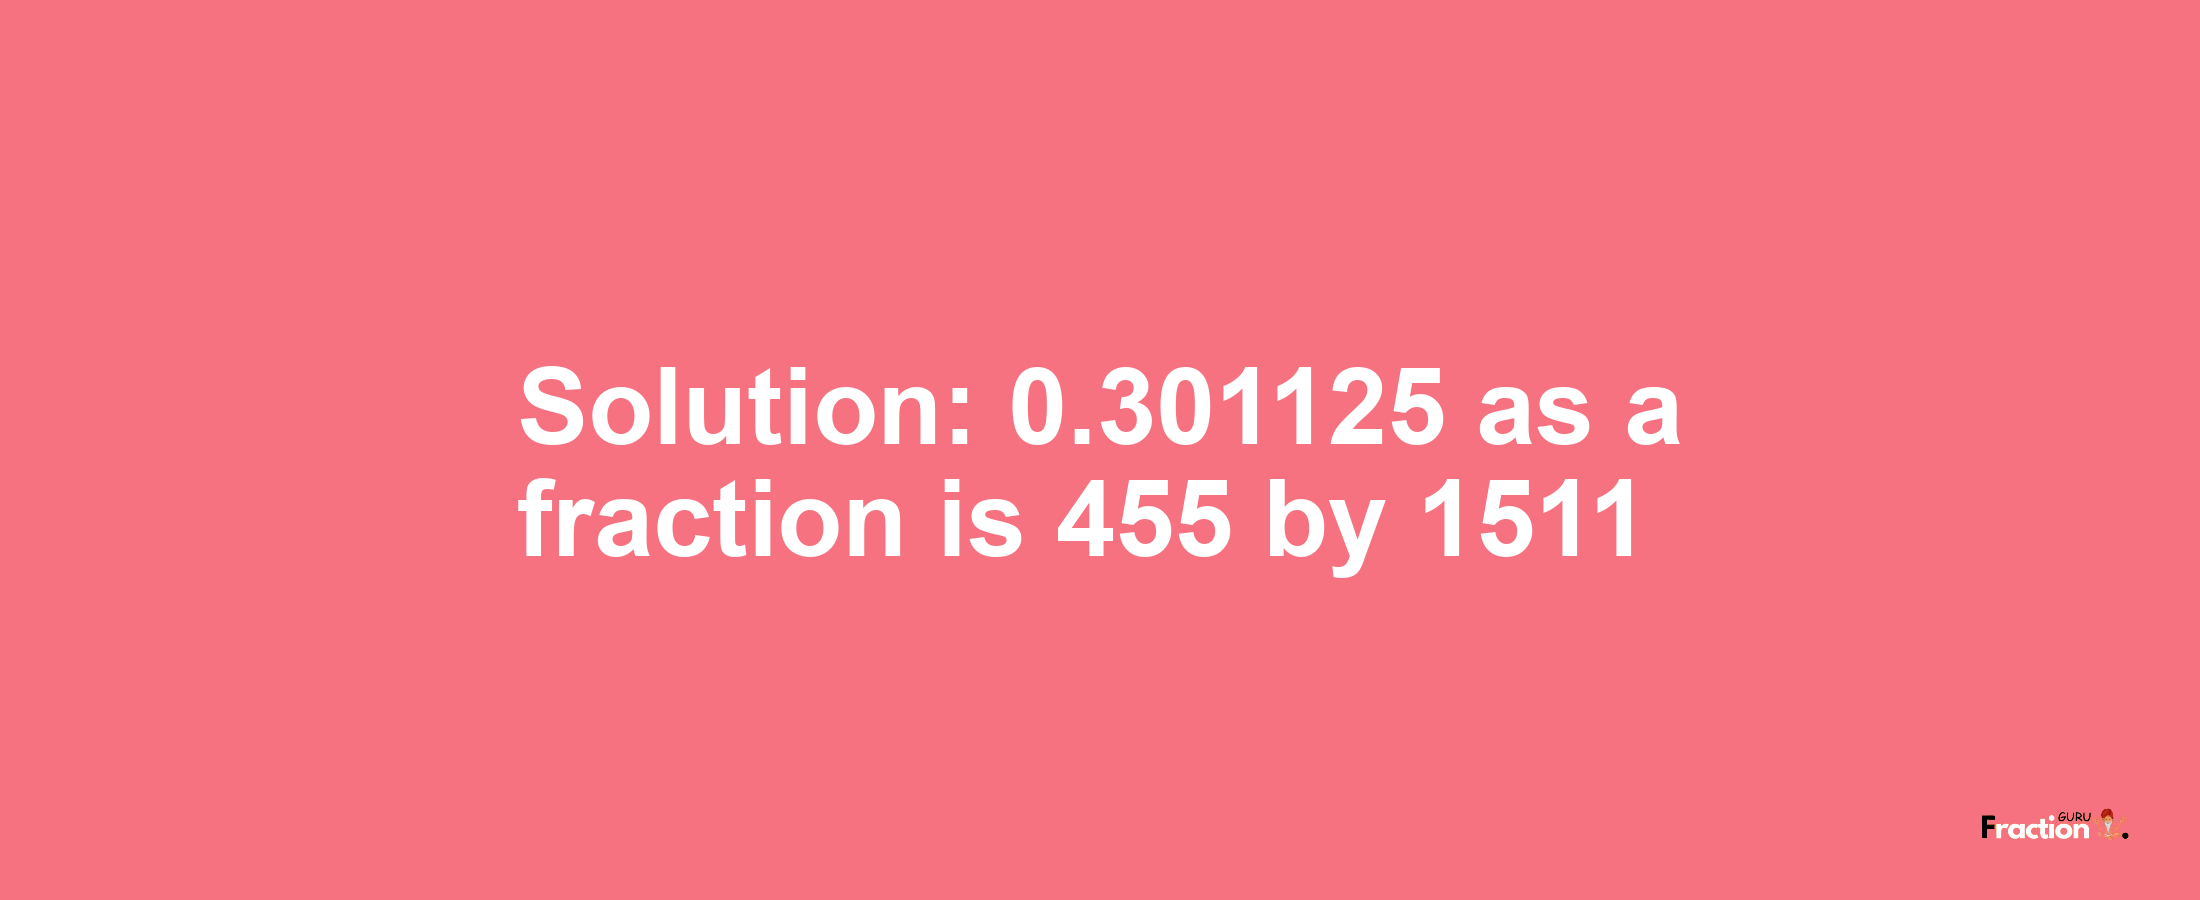 Solution:0.301125 as a fraction is 455/1511